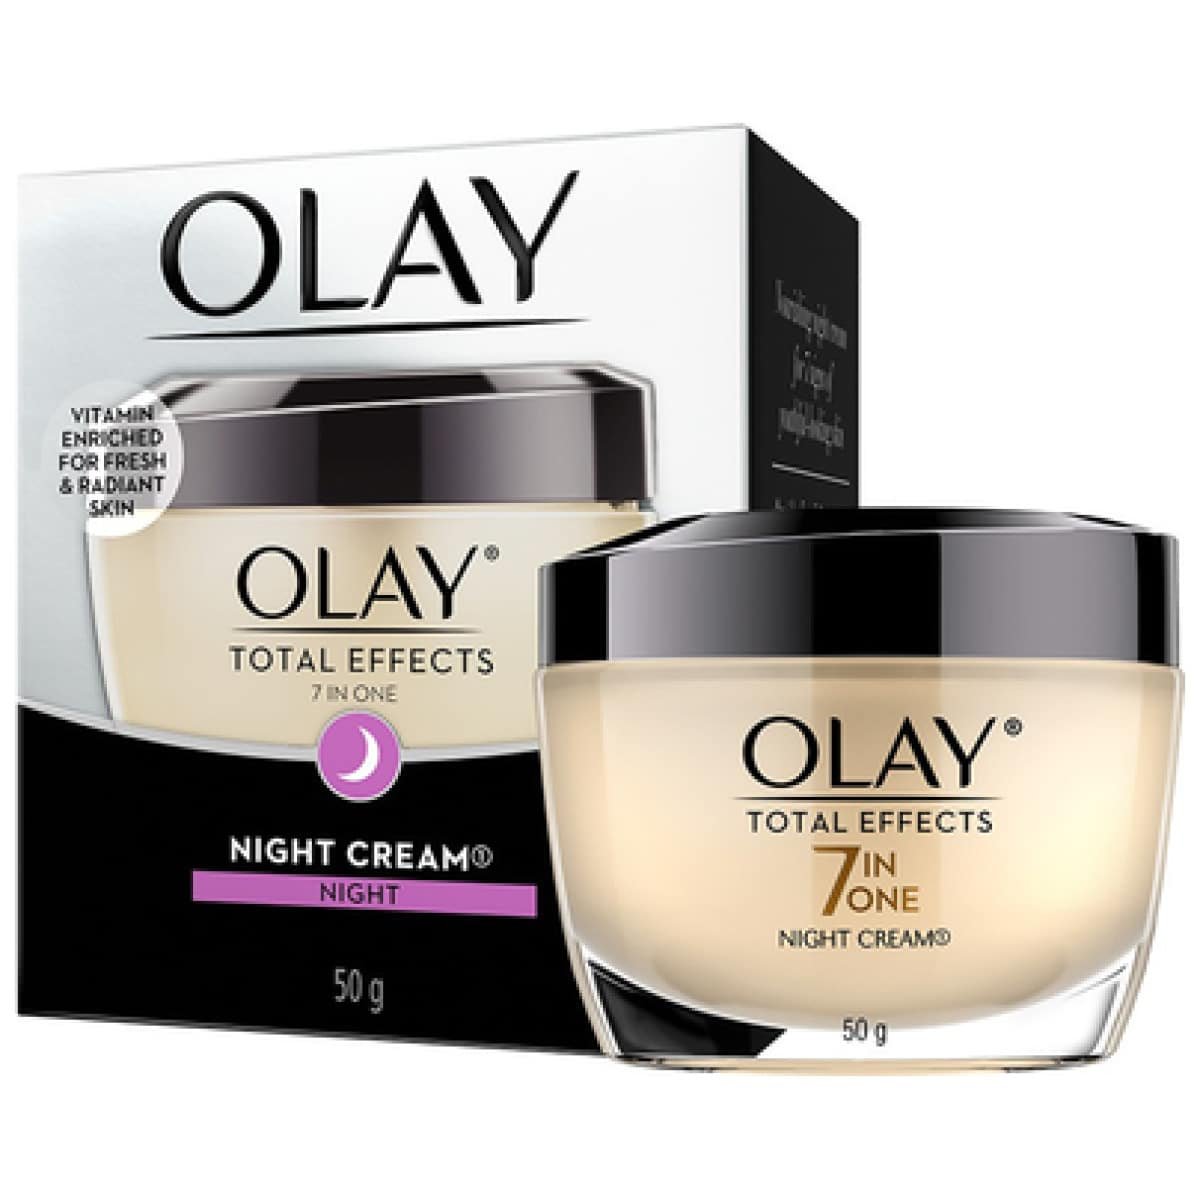 Olay Total Effects 7 in One Night Cream Face Moisturizer 50gm